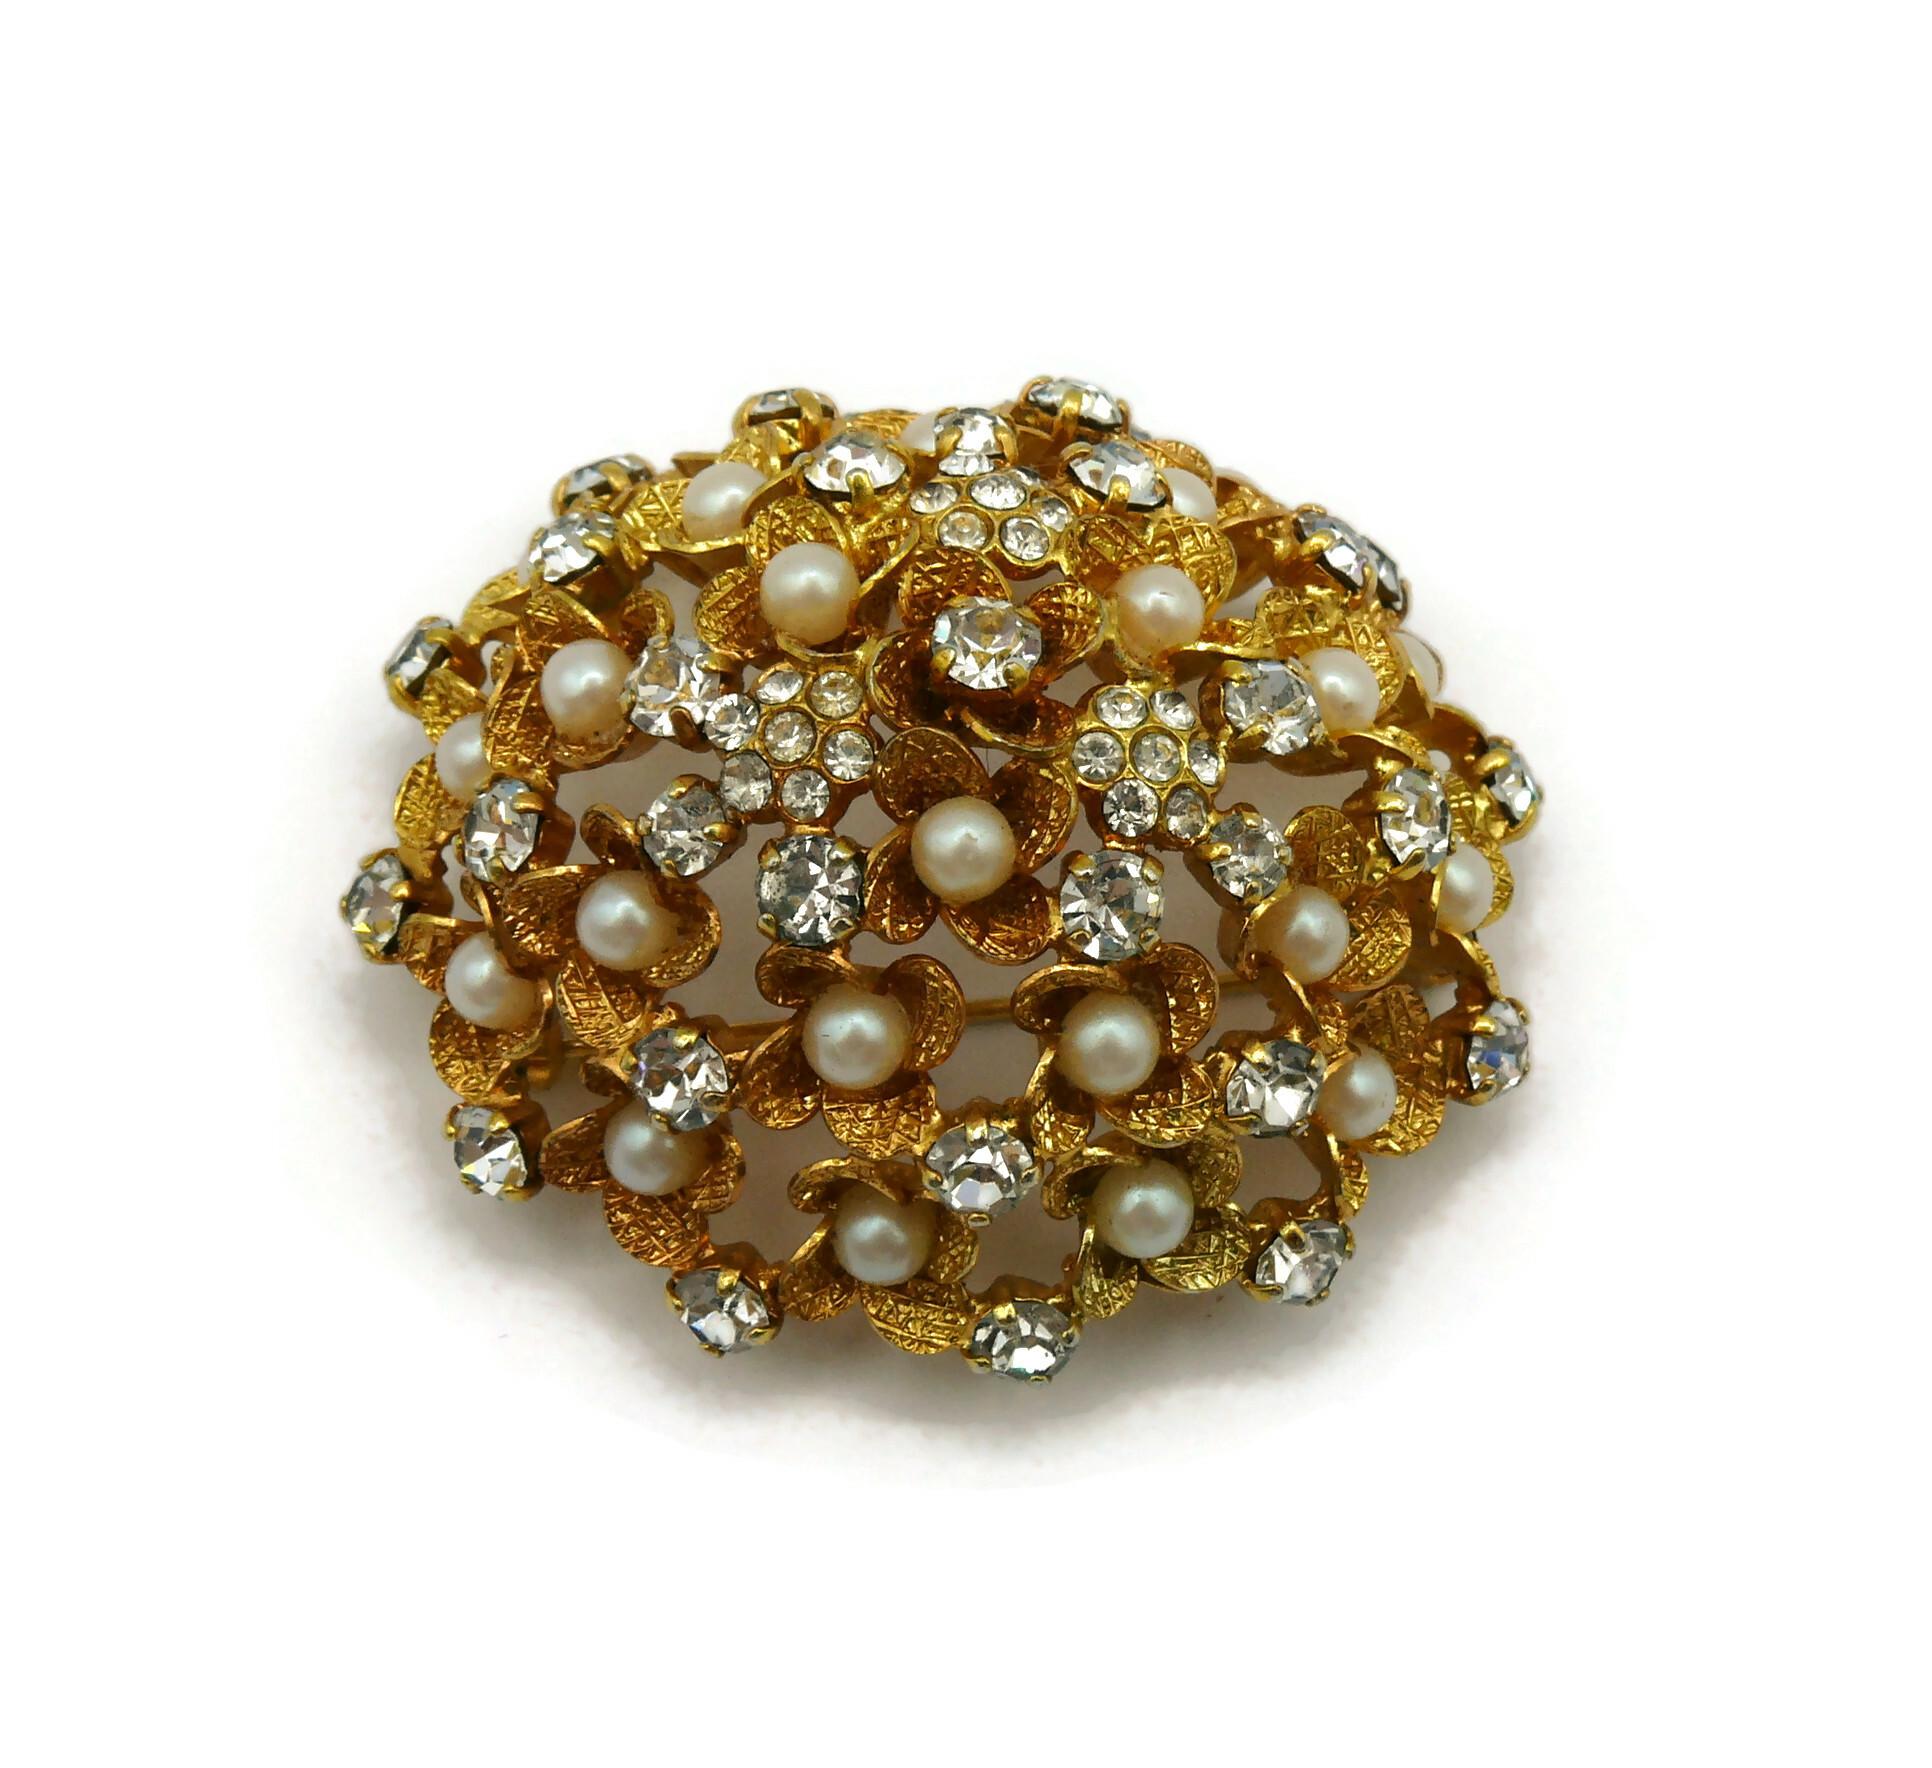 CHRISTIAN DIOR Vintage Jewelled Gold Tone Domed Brooch, 1966 For Sale 1